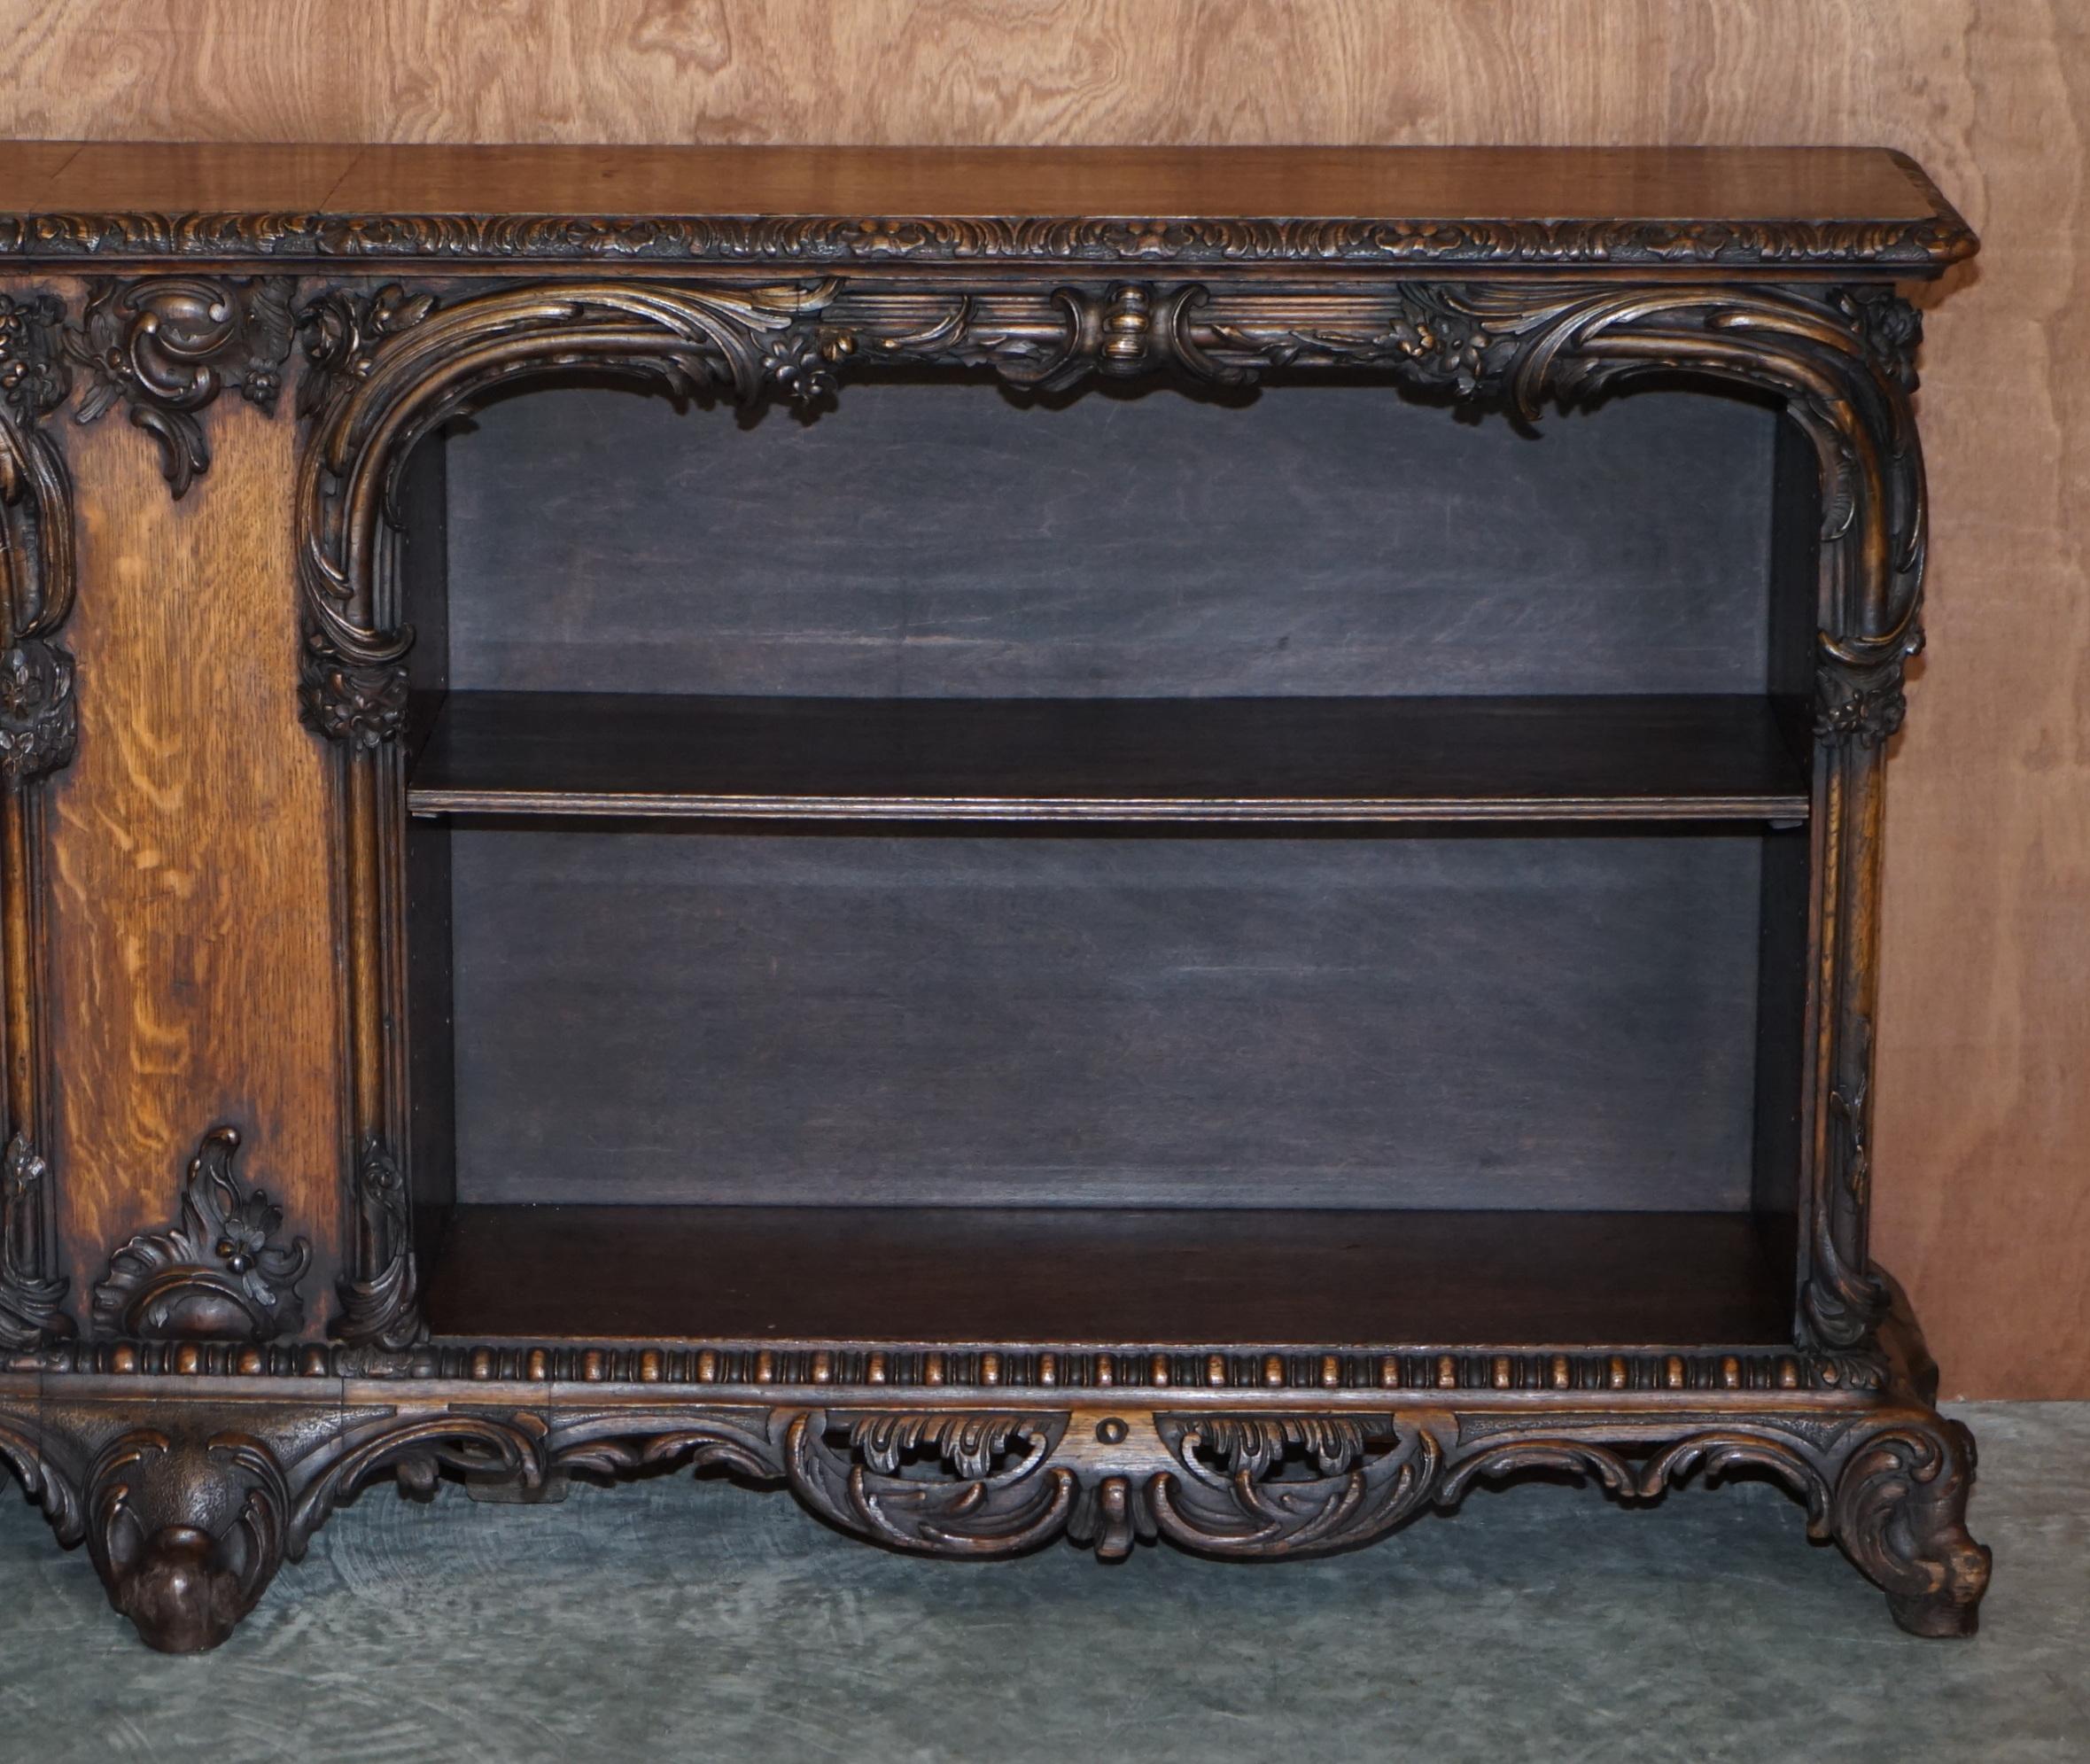 Late 19th Century Exquisitely Carved Antique Art Nouveau circa 1890 Long Open Library Bookcase